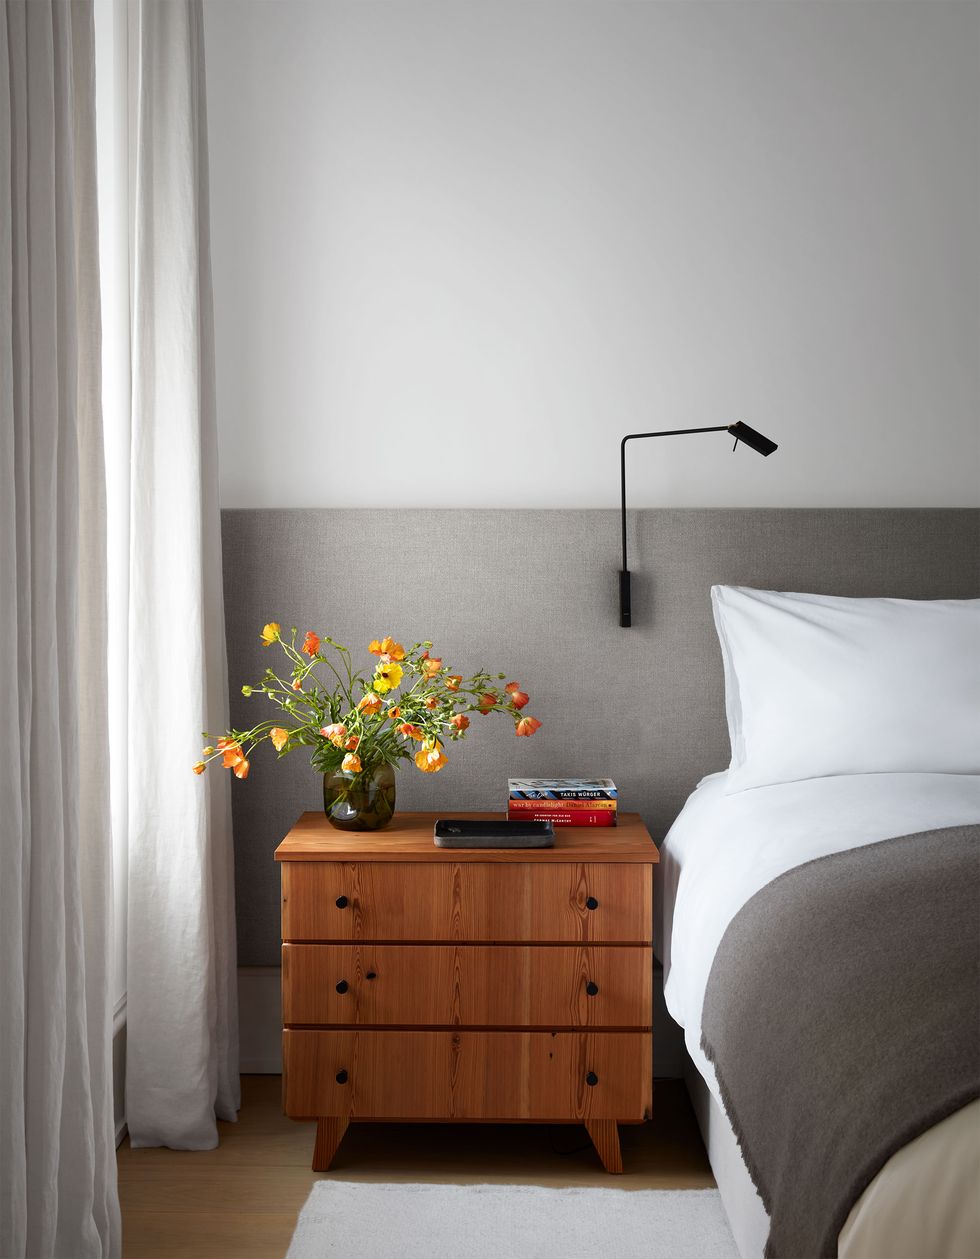 a bed has an oatmeal fabric headboard that extends along the wall with a reading sconce attached, a side table with three drawers and books and a vase with flowers atop it, curtains hang on the window